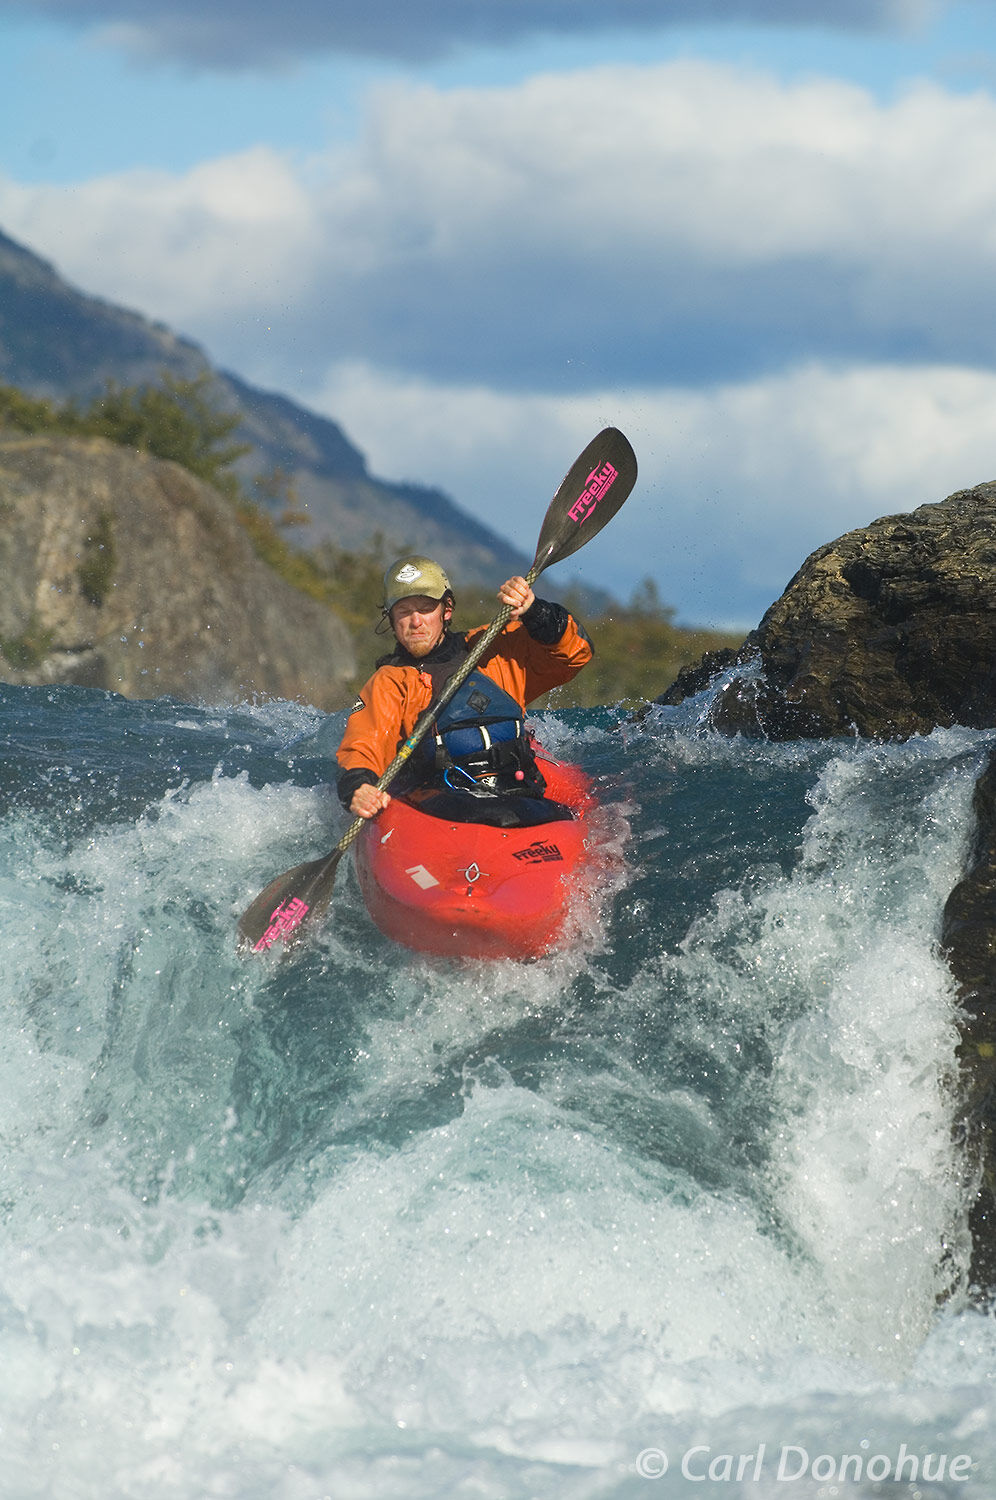 Whitewater kayaking at its best. The Rio Baker, or Baker River, in southern Patagonia, Chile offers some of the best whitewater...